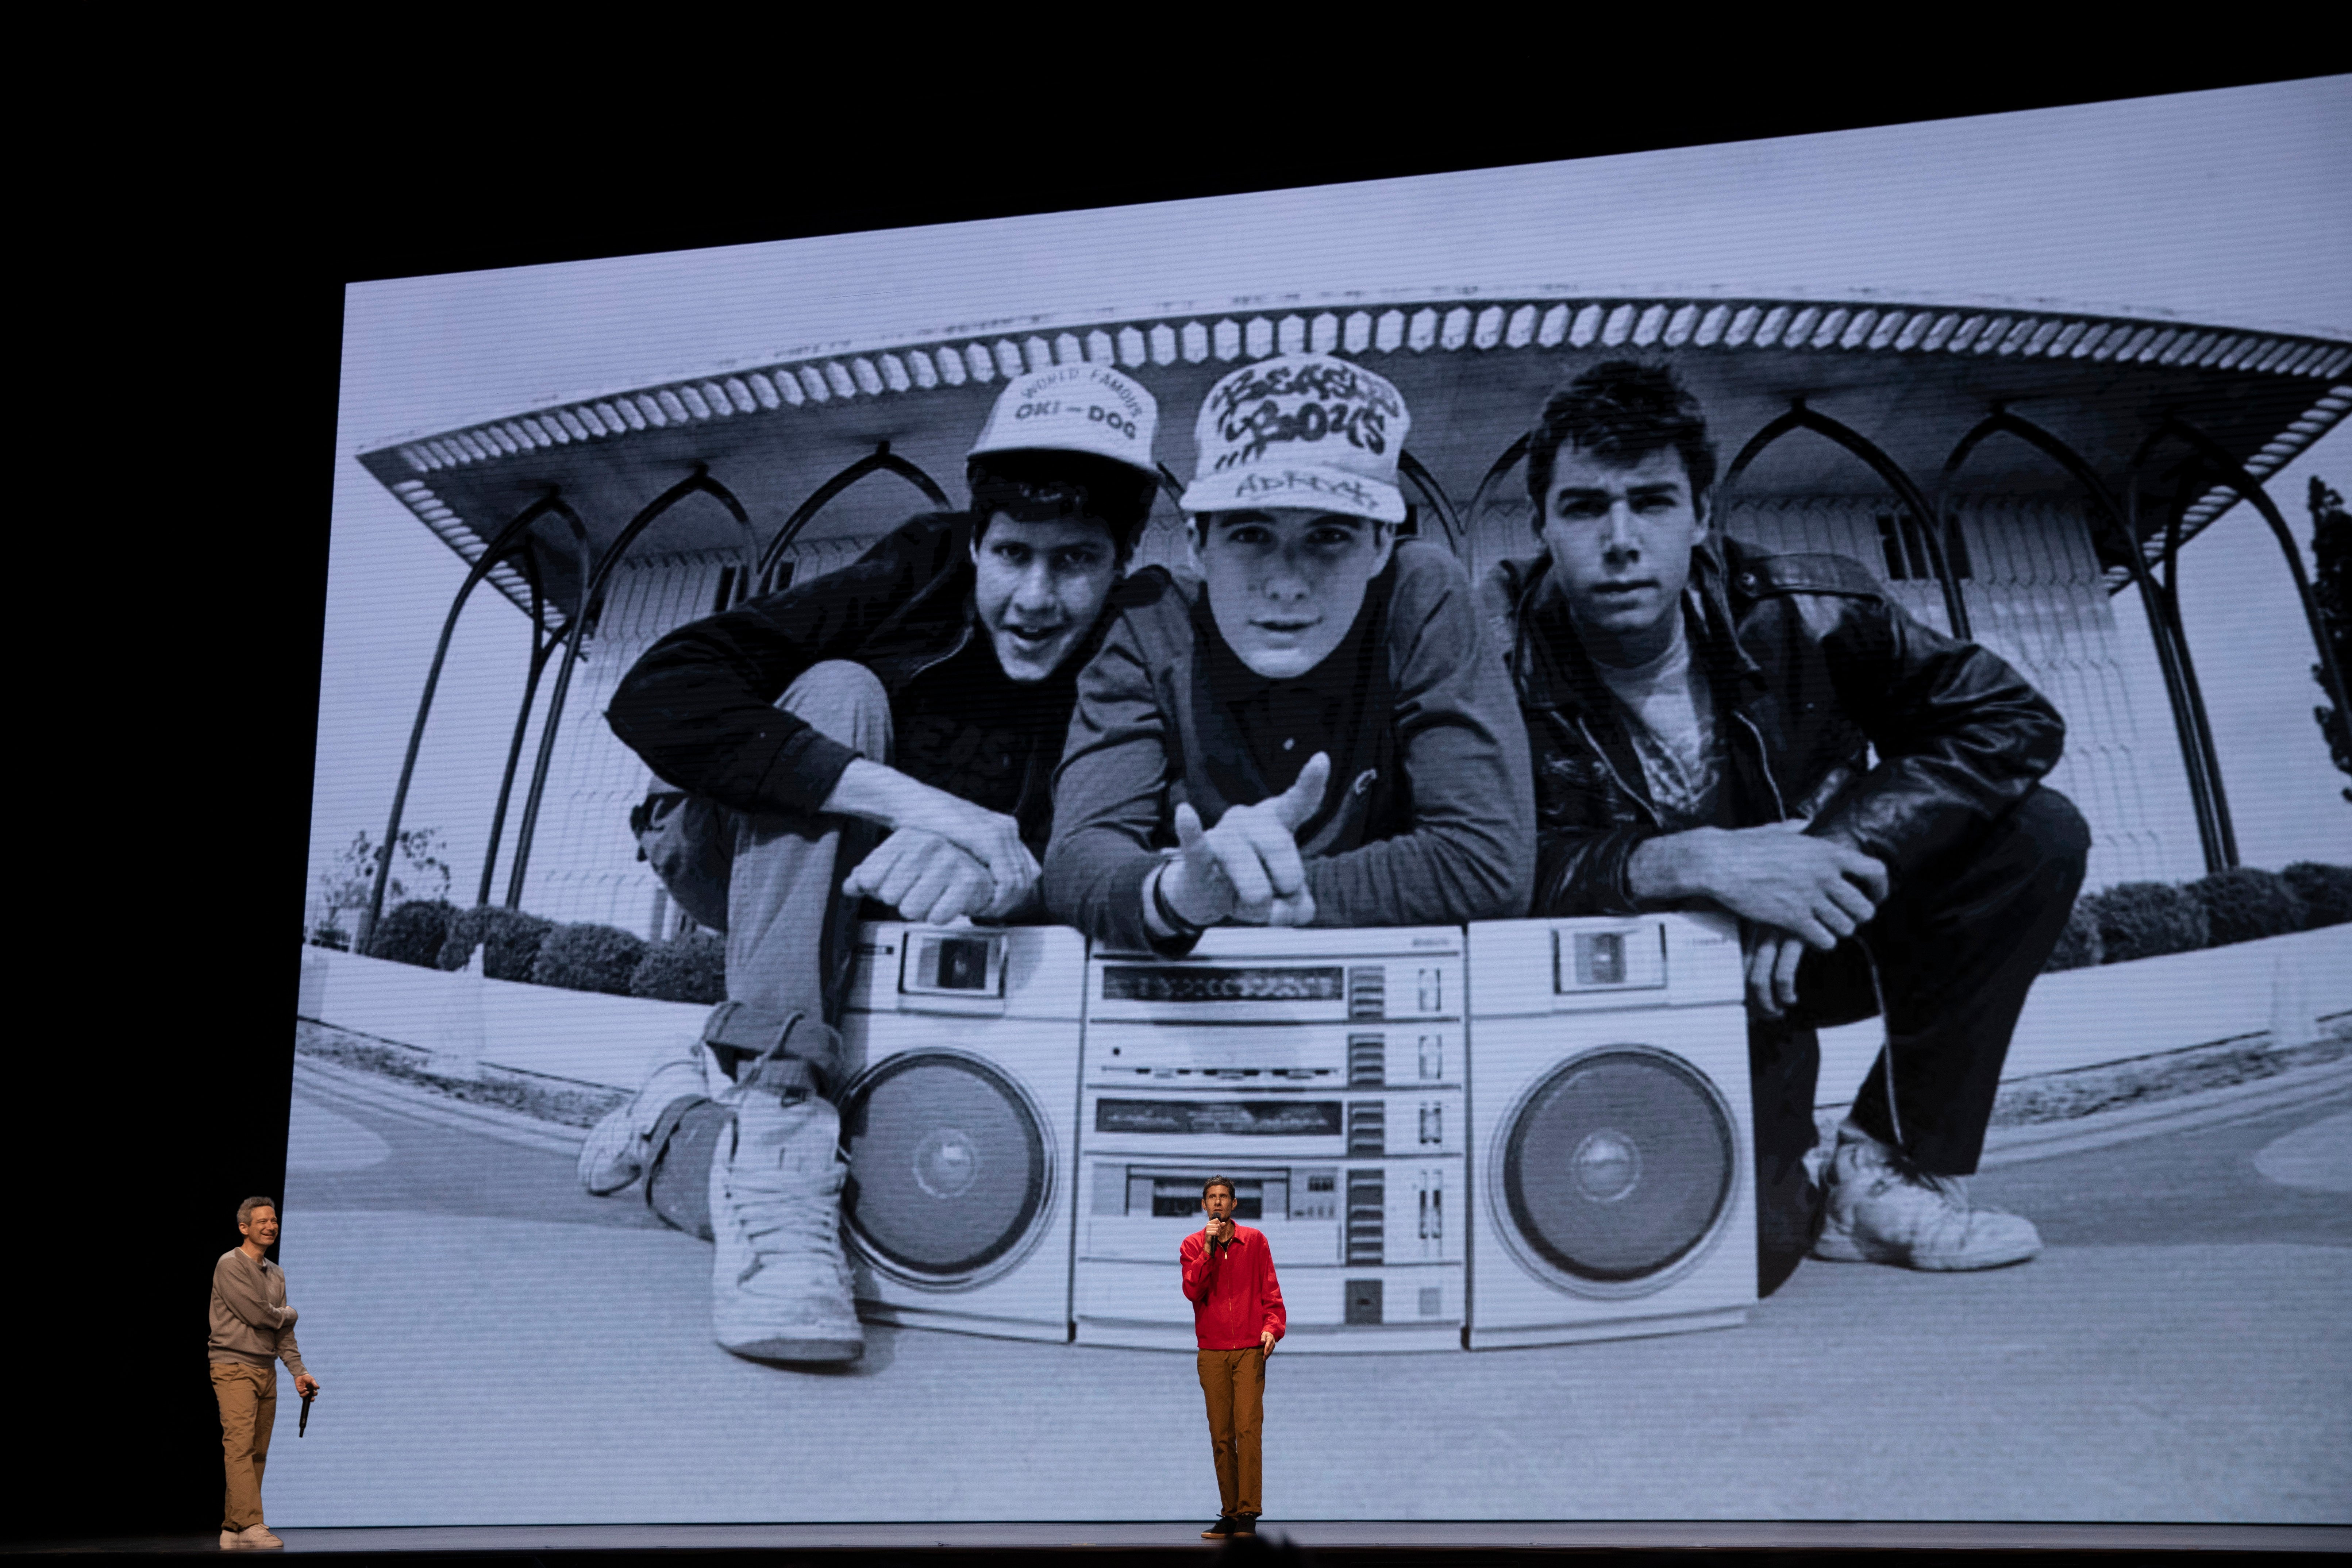 Ad-Rock and Mike D hold microphones onstage in front of a giant screen showing the three Beastie Boys gathered around a boombox in their youth